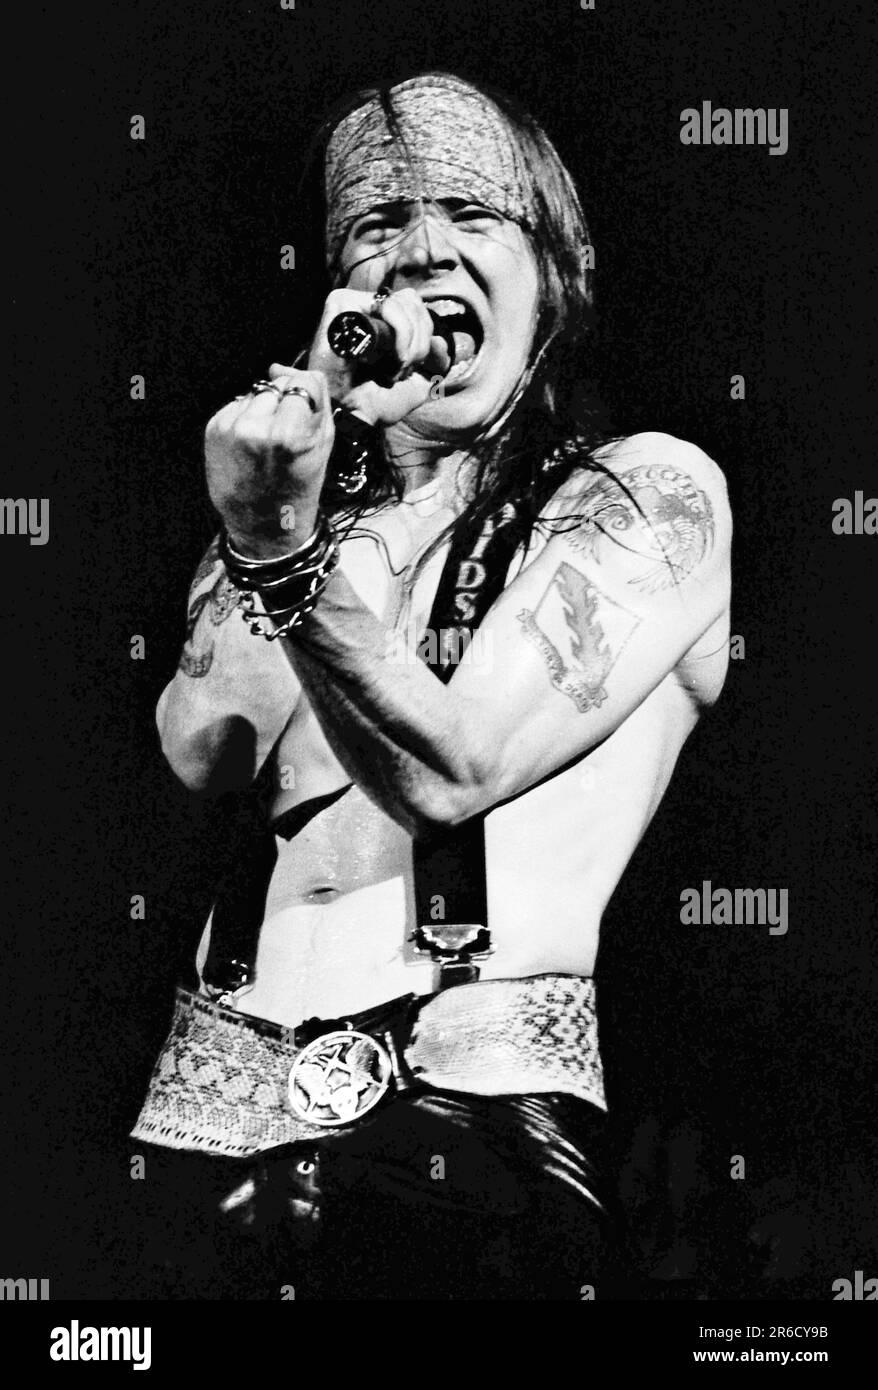 Axl rose Black and White Stock Photos & Images - Alamy